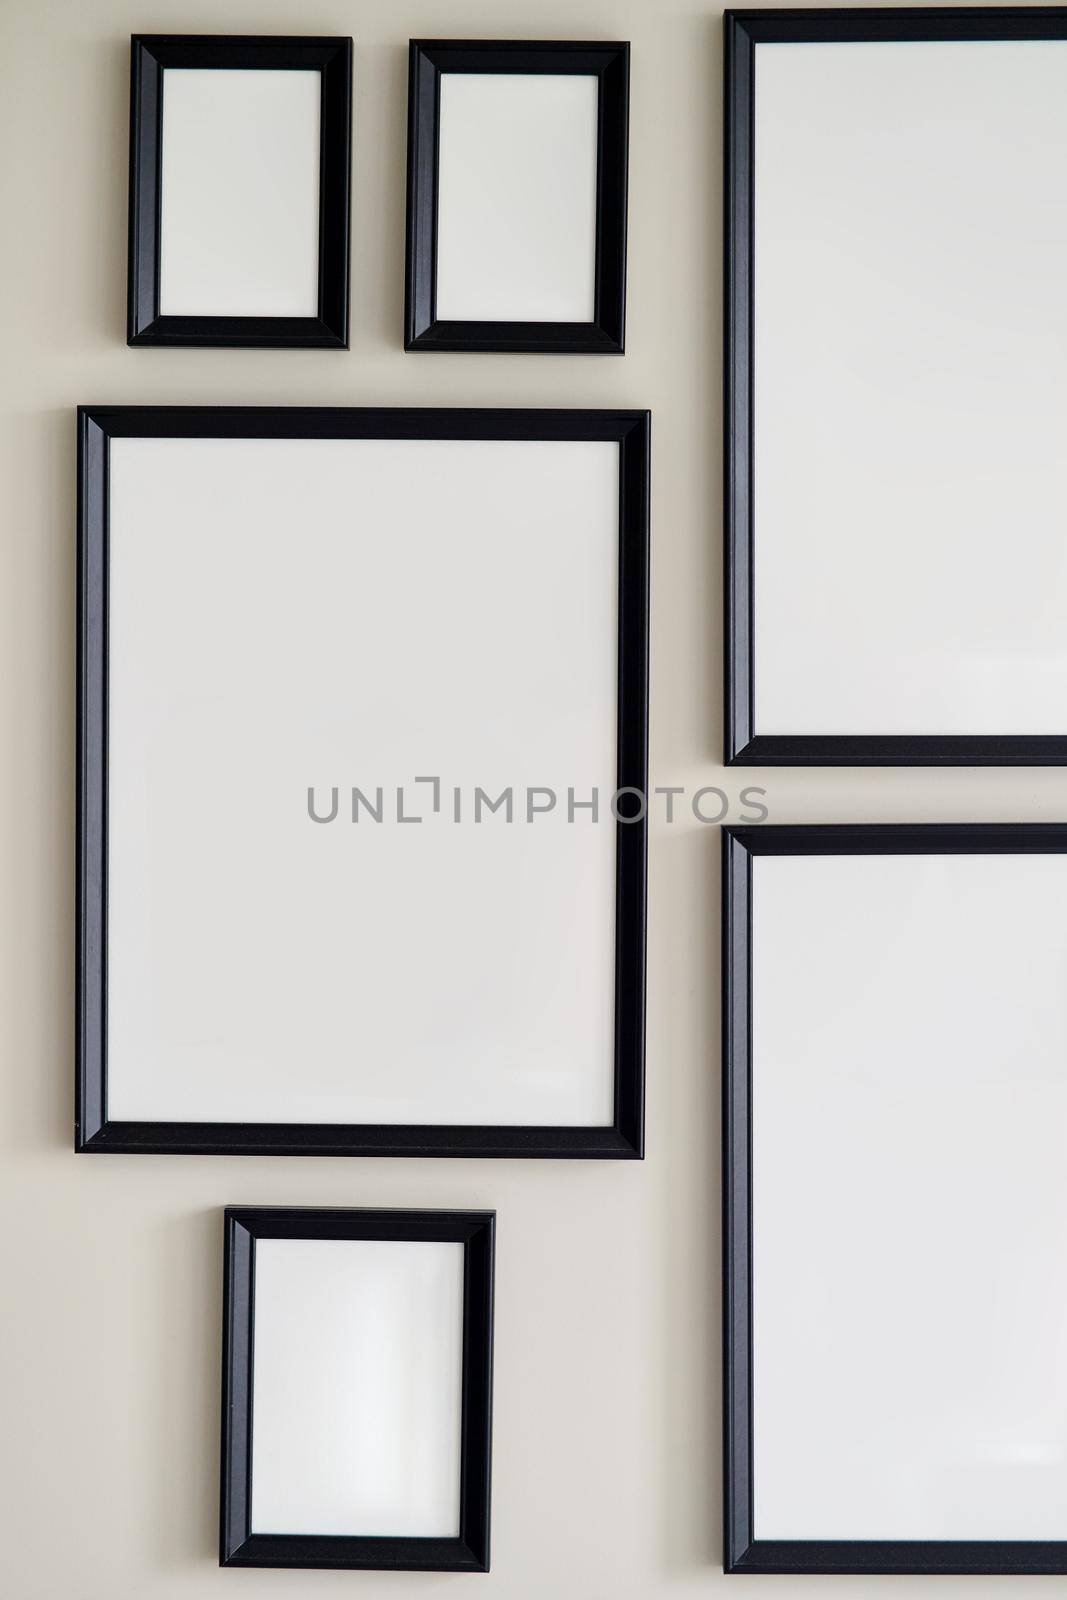 Different size framed photos hanging on the gray wall. High quality photo